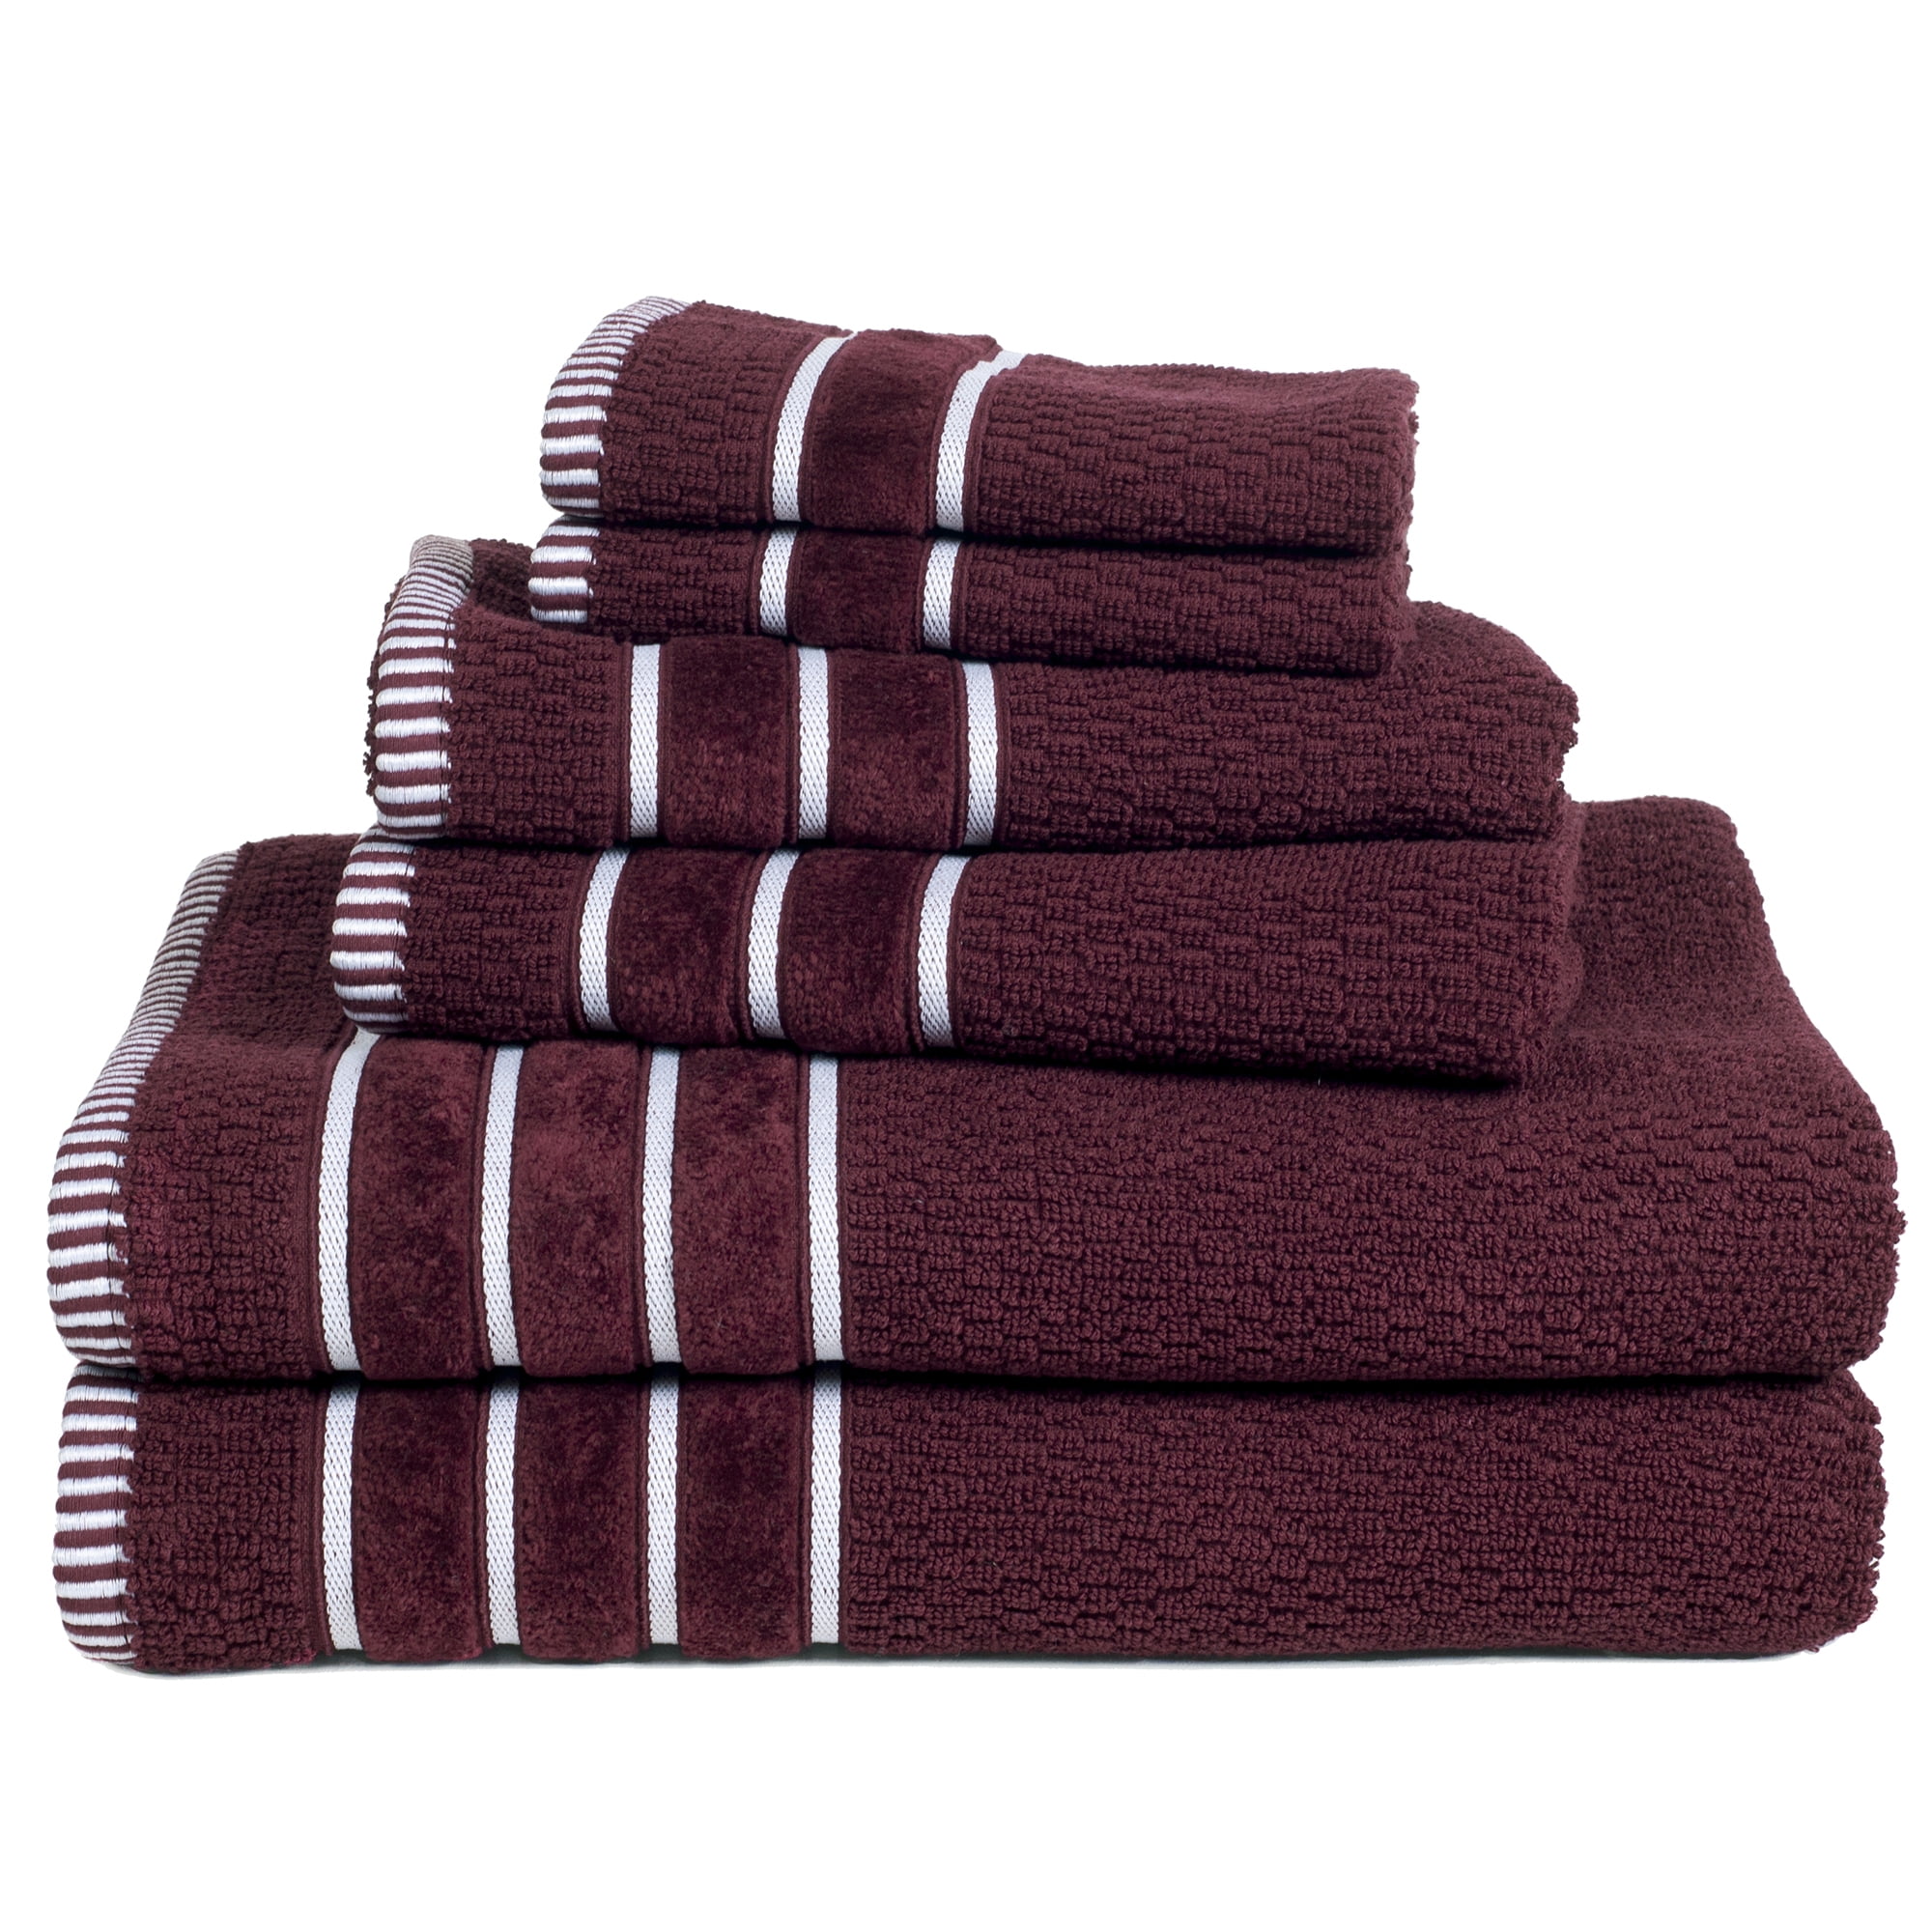 White Spa Towels - Belem 30X56 - Pack of 2 - 100% combed cotton